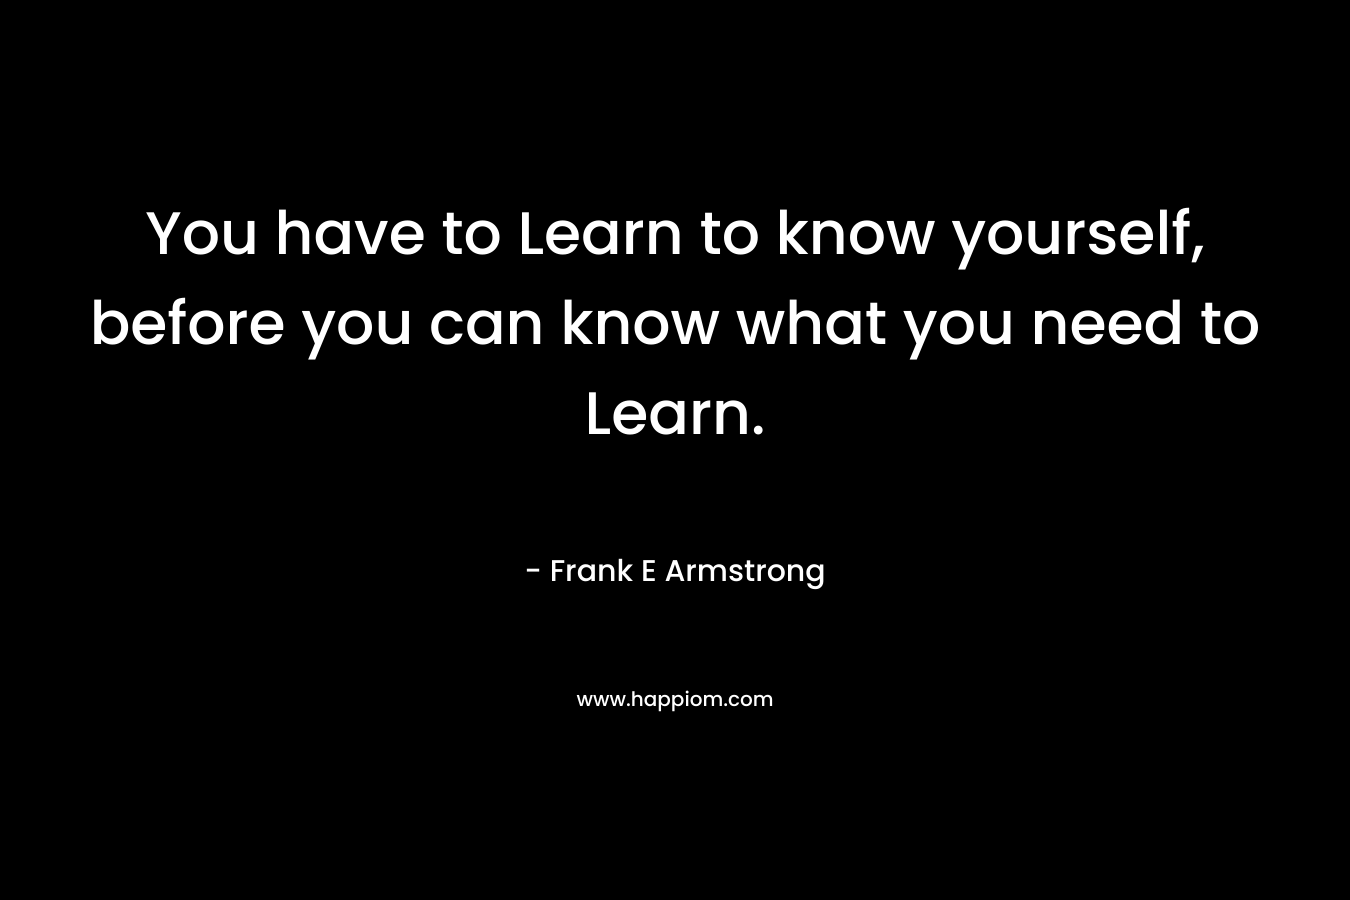 You have to Learn to know yourself, before you can know what you need to Learn.